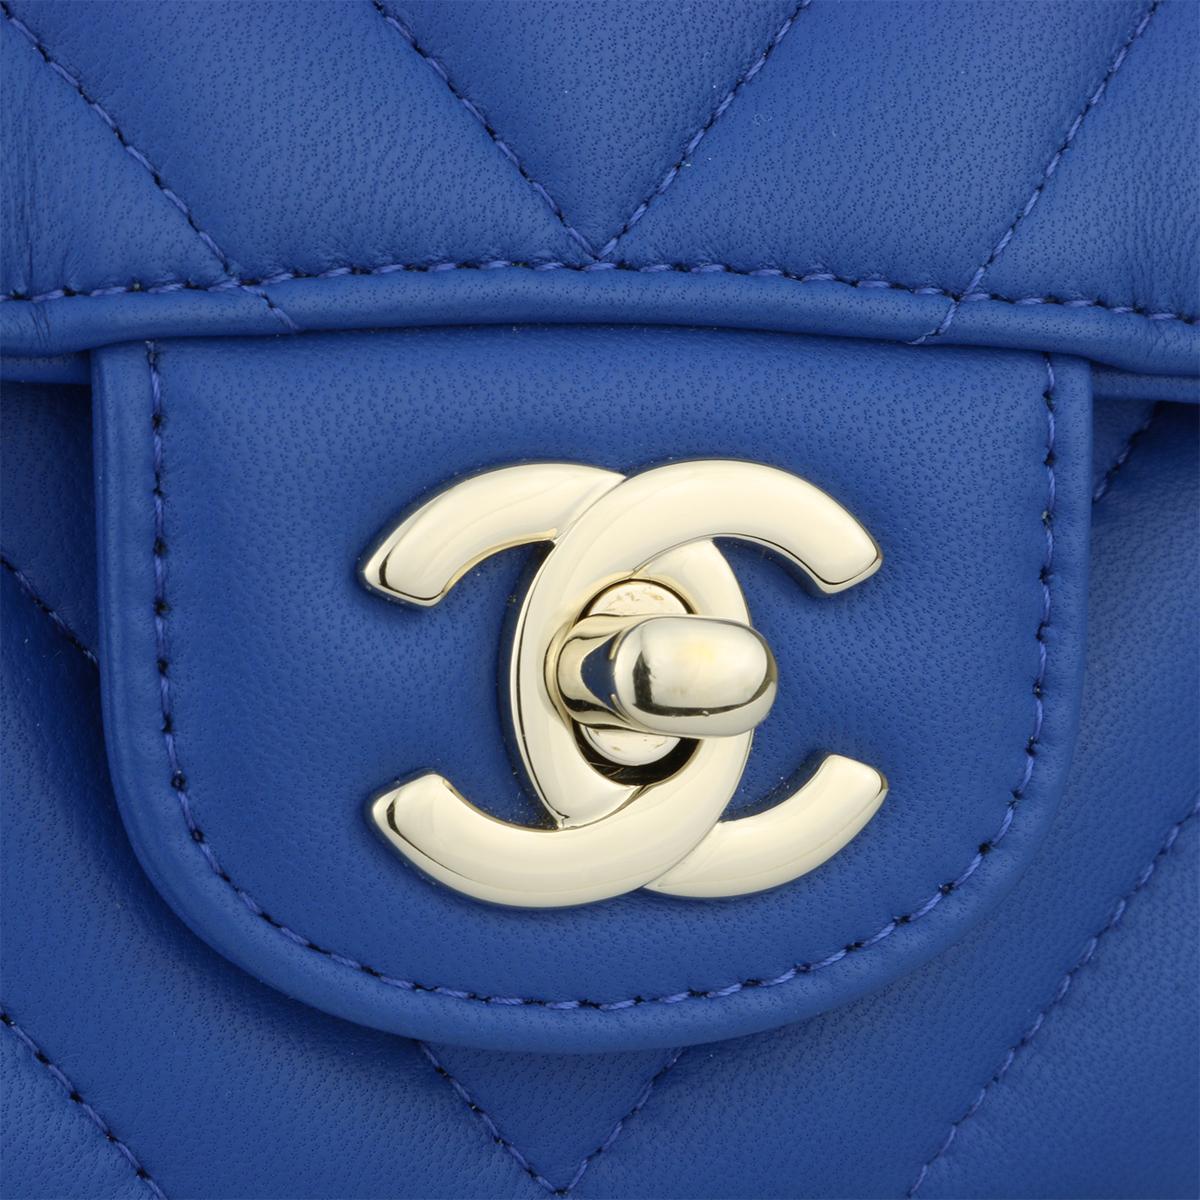 CHANEL Rectangular Mini Bag Blue Chevron Lambskin with Light Gold Hardware 2019

This bag is in excellent condition, the bag still holds its shape well, and the hardware is still shiny.

Exterior Condition: Excellent condition. Outside of the bag is